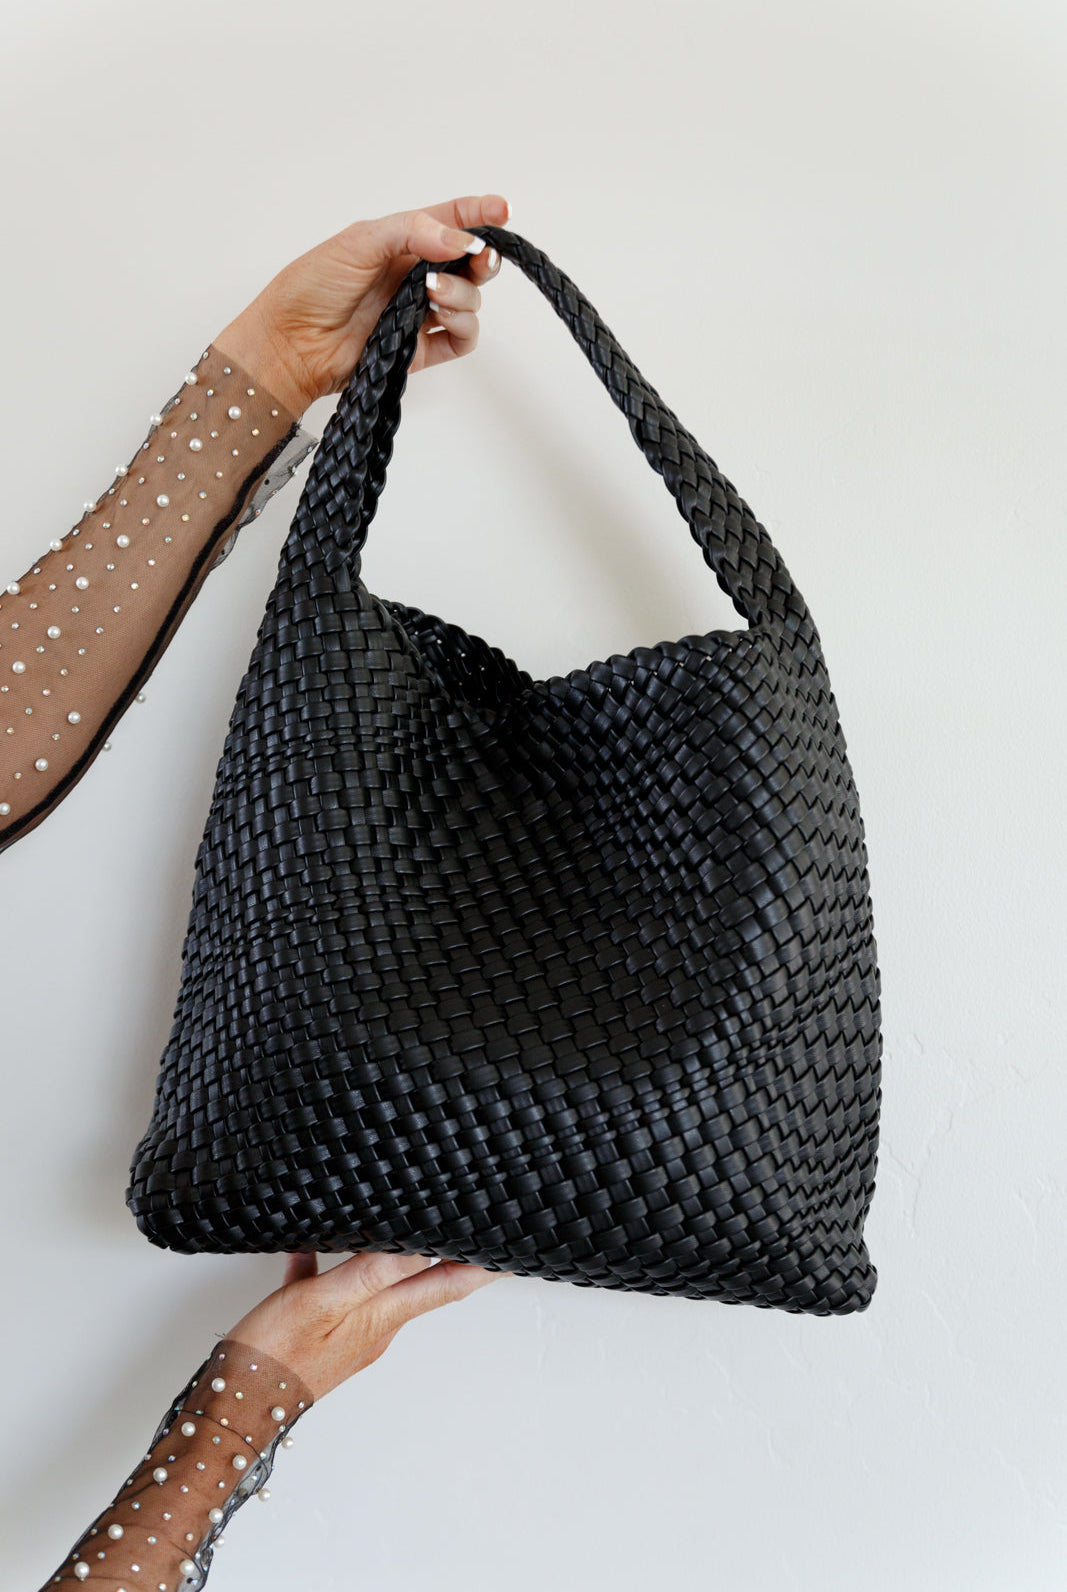 Woven and Worn Tote in Black-Accessories- Simply Simpson's Boutique is a Women's Online Fashion Boutique Located in Jupiter, Florida